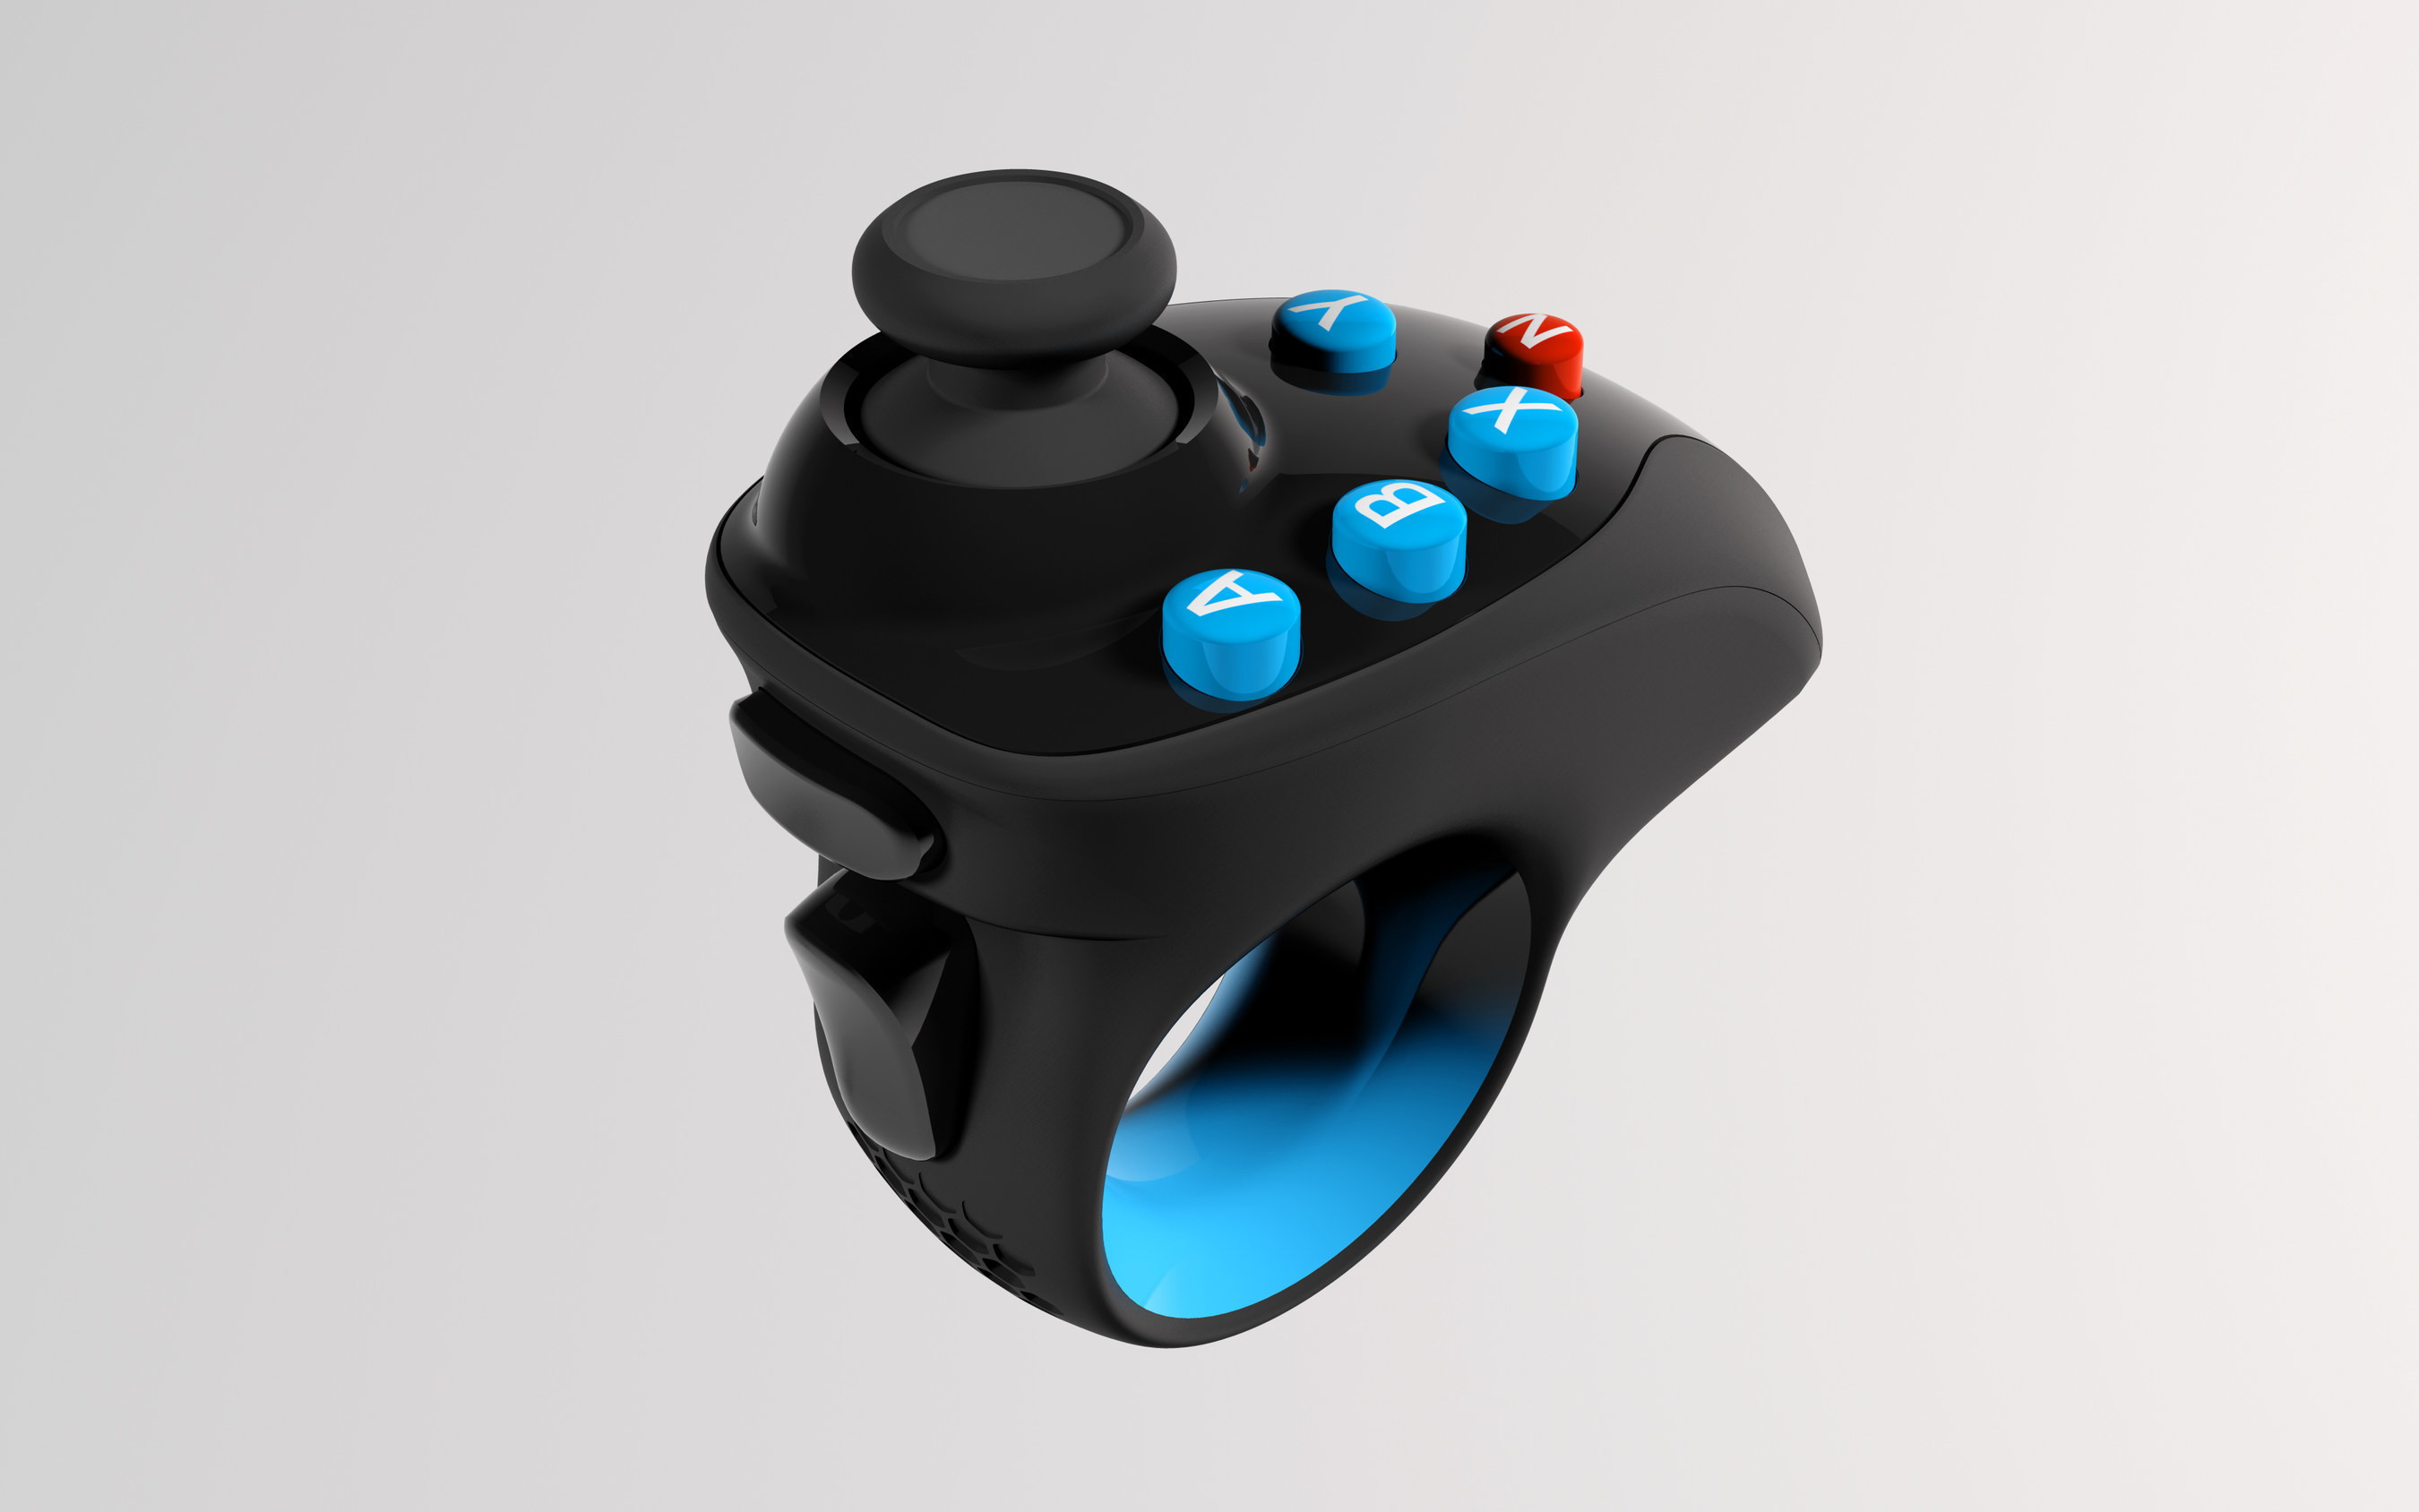 The Nod Backspin is the first multiplatform controller designed for VR with low latency, sub-millimeter accuracy hand tracking, and traditional joystick and analog controls.